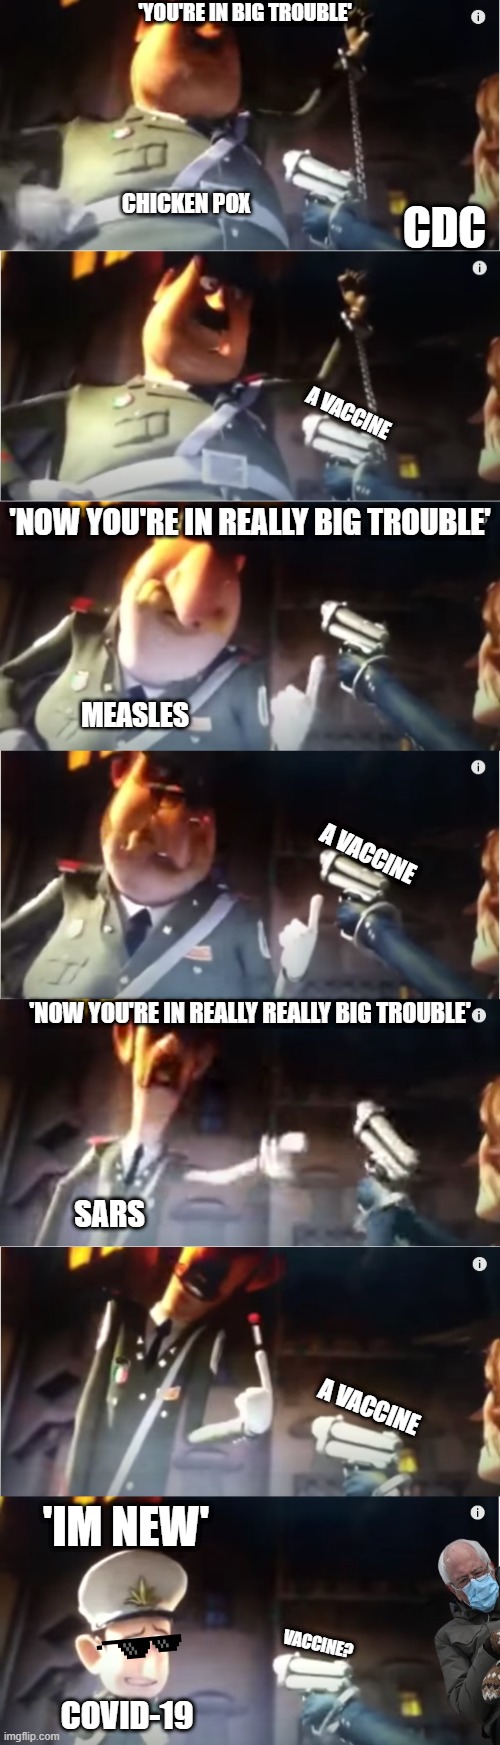 'YOU'RE IN BIG TROUBLE'; CHICKEN POX; CDC; A VACCINE; 'NOW YOU'RE IN REALLY BIG TROUBLE'; MEASLES; A VACCINE; 'NOW YOU'RE IN REALLY REALLY BIG TROUBLE'; SARS; A VACCINE; 'IM NEW'; VACCINE? COVID-19 | image tagged in disease | made w/ Imgflip meme maker